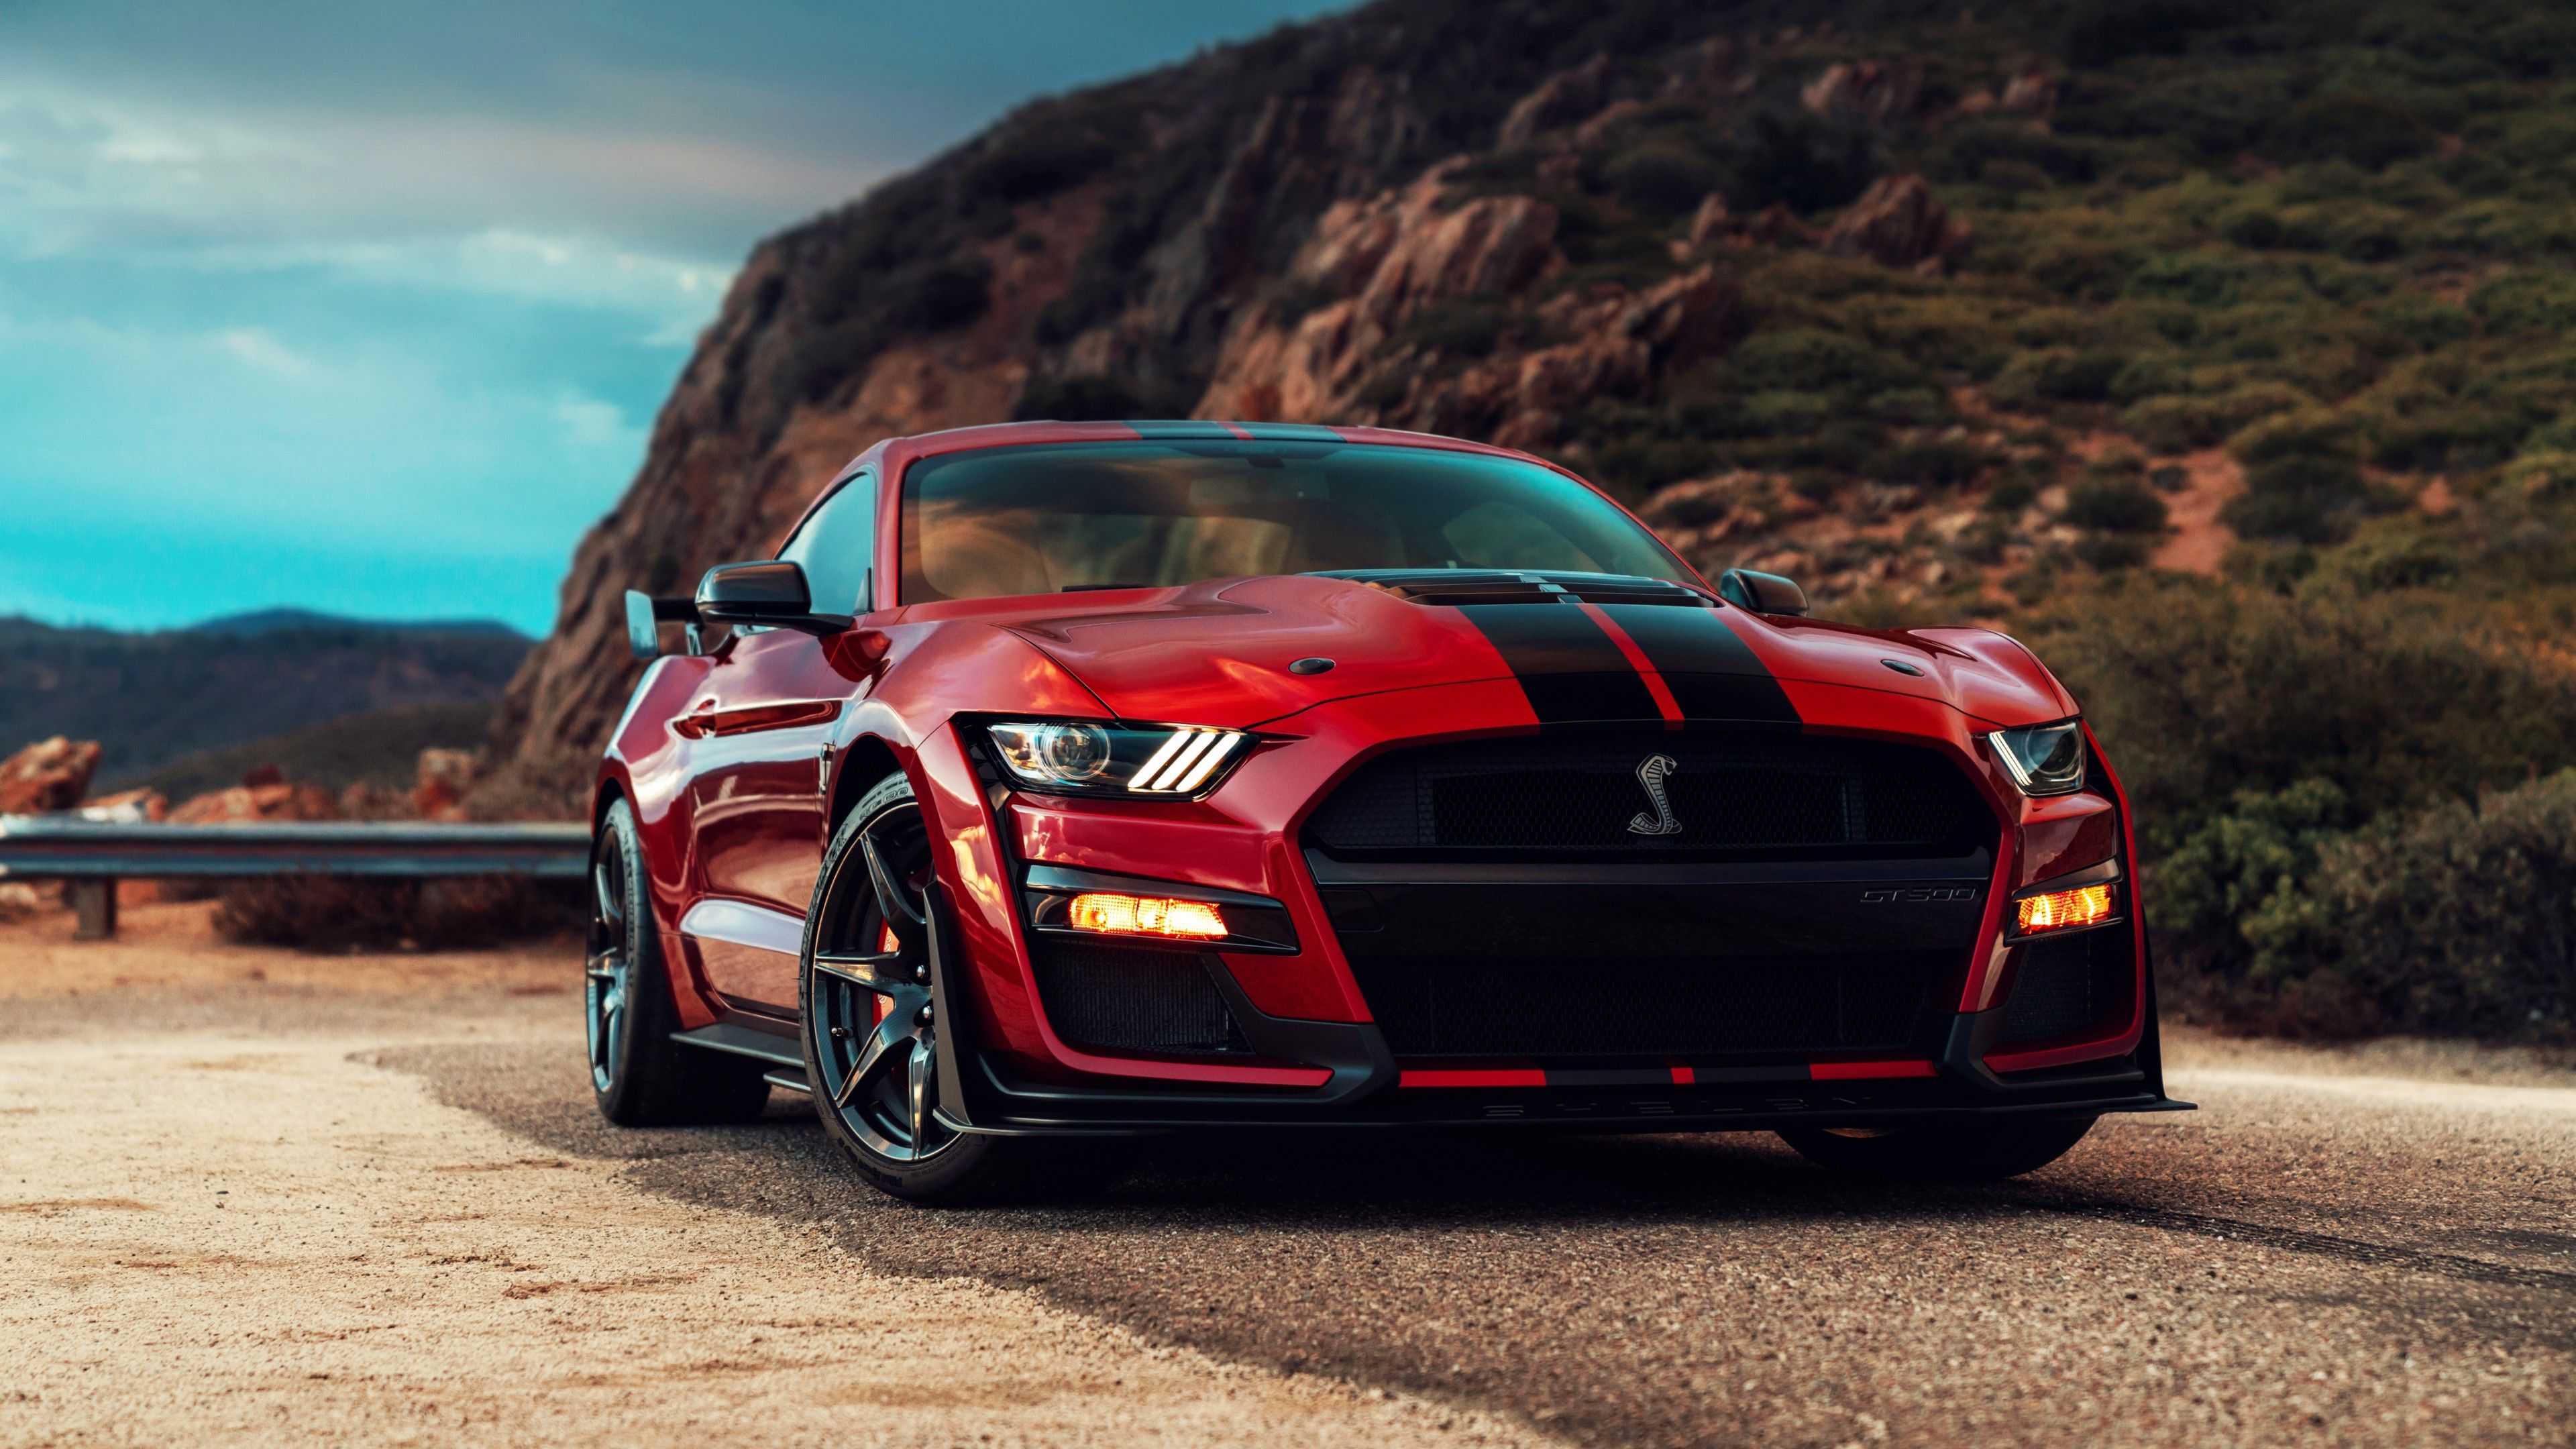 Ford Mustang 4K Ultra HD Wallpapers - Wallpaper Cave